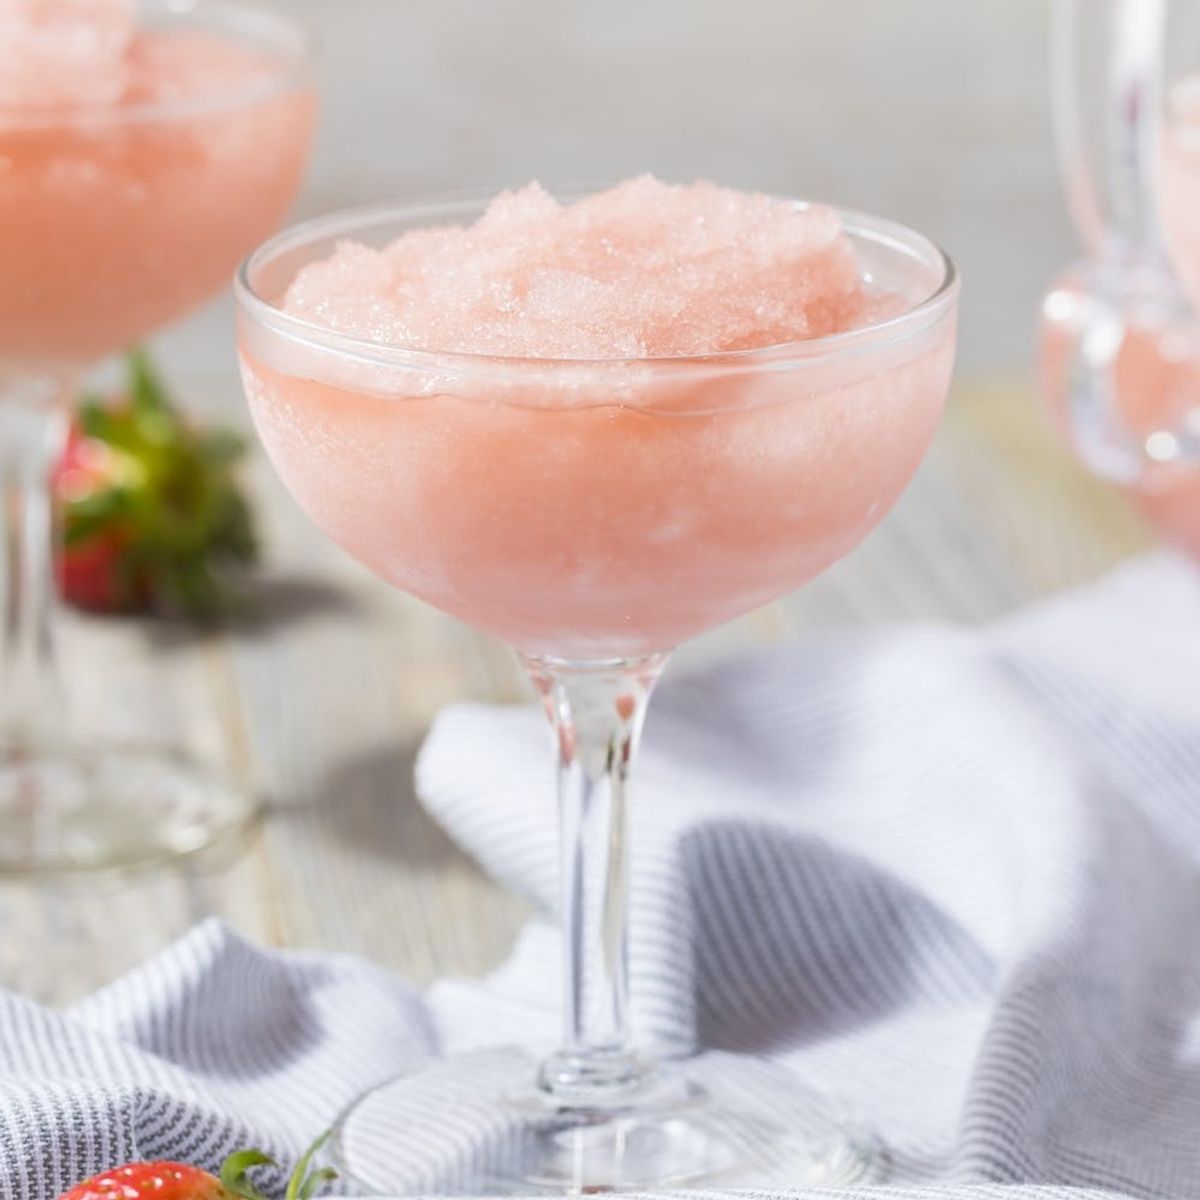 You Can Now Get Your Poolside Frosé Fix at Disney World